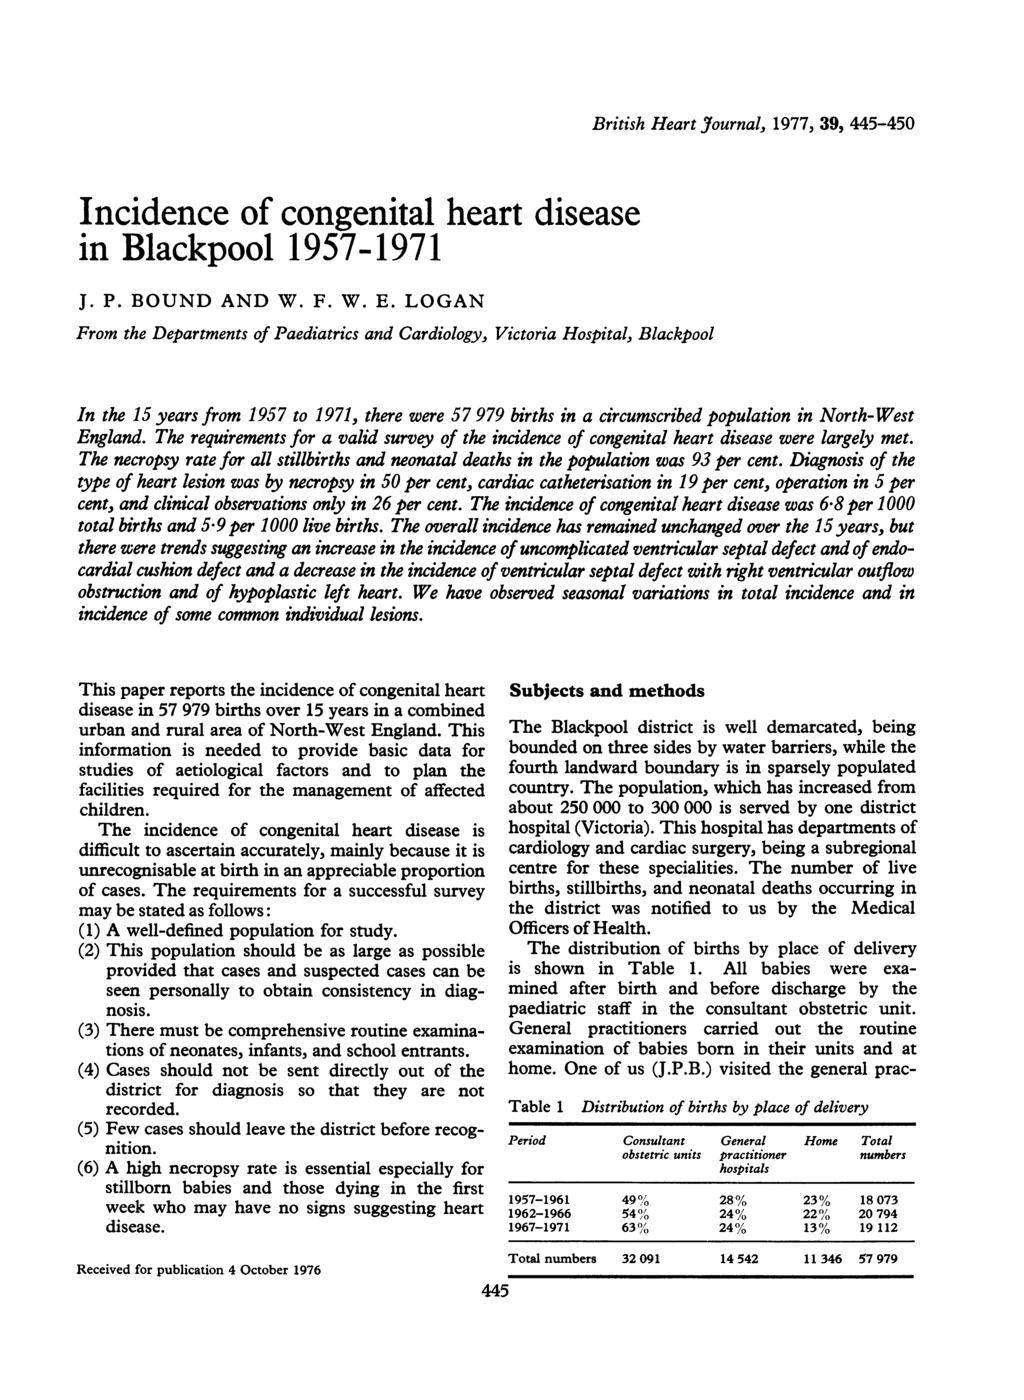 Incidence of congenital heart disease in Blackpool 1957-1971 J. P. BOUND AND W. F. W. E.